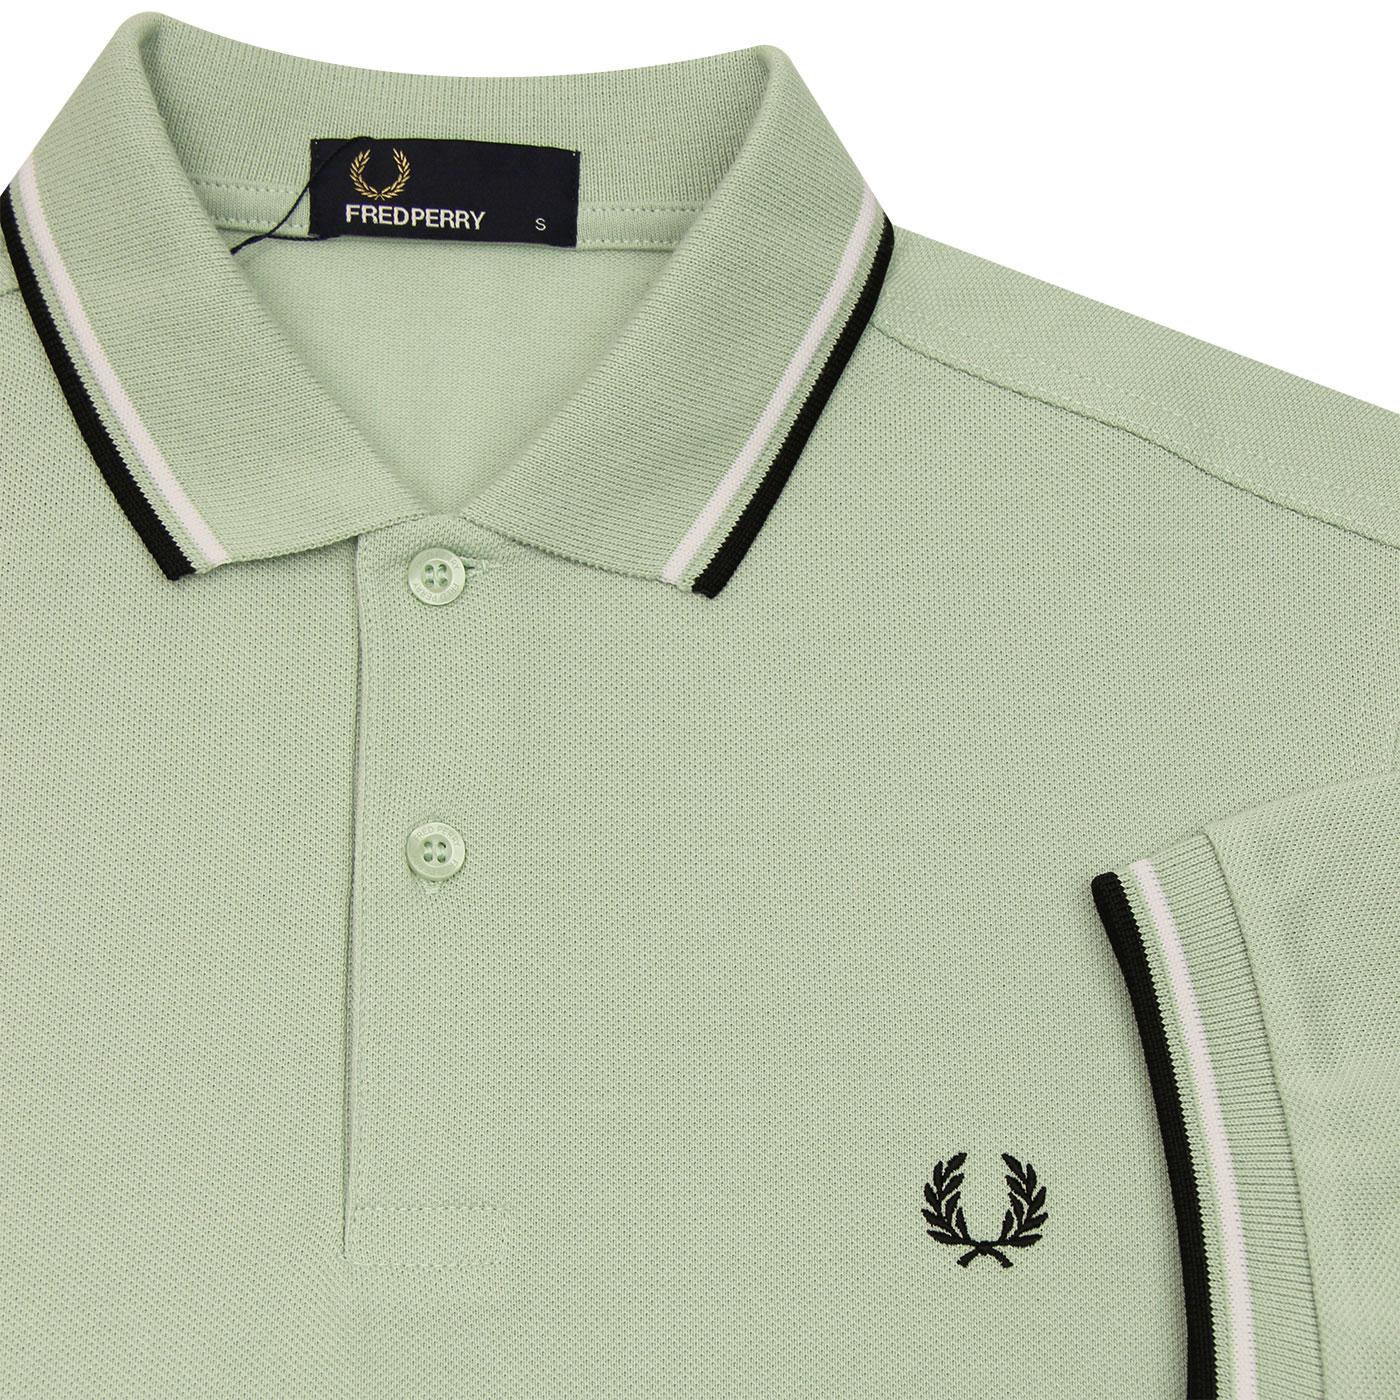 FRED PERRY M3600 Twin Tipped Mod Polo Shirt in Mint